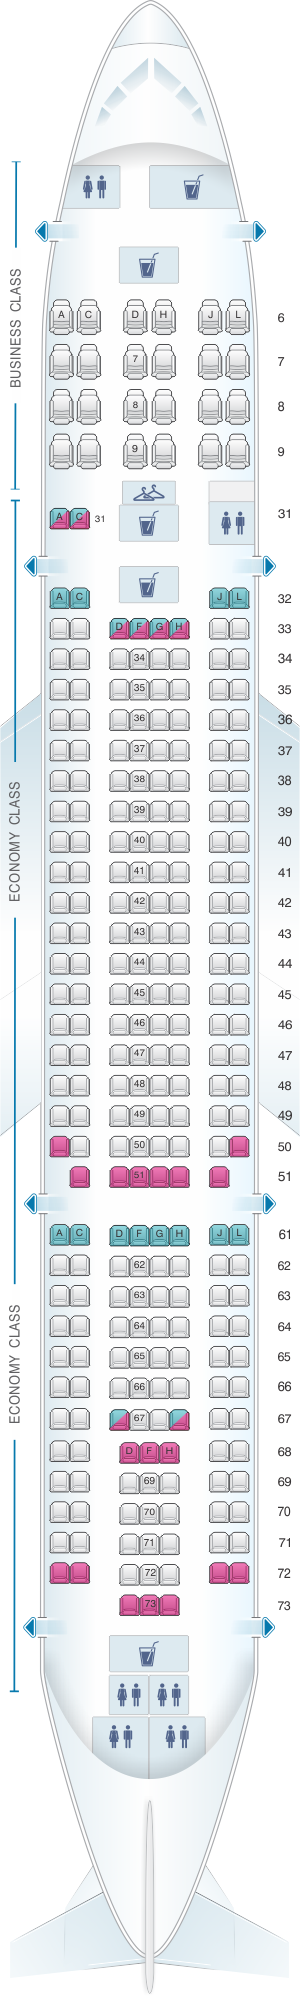 Seat map for China Eastern Airlines Airbus A300 600 config.1